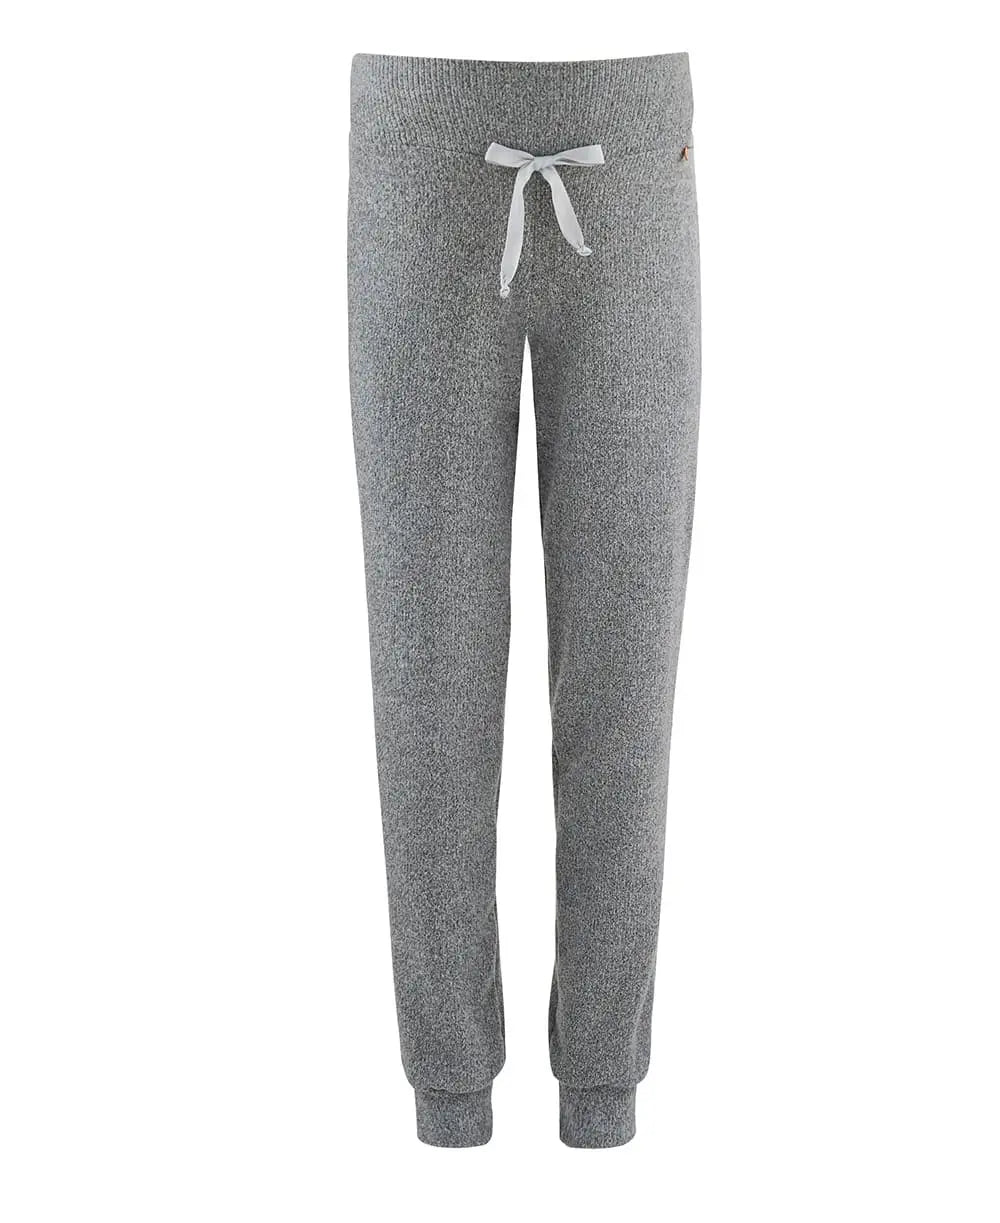 Maternity trousers Sweet Home grey